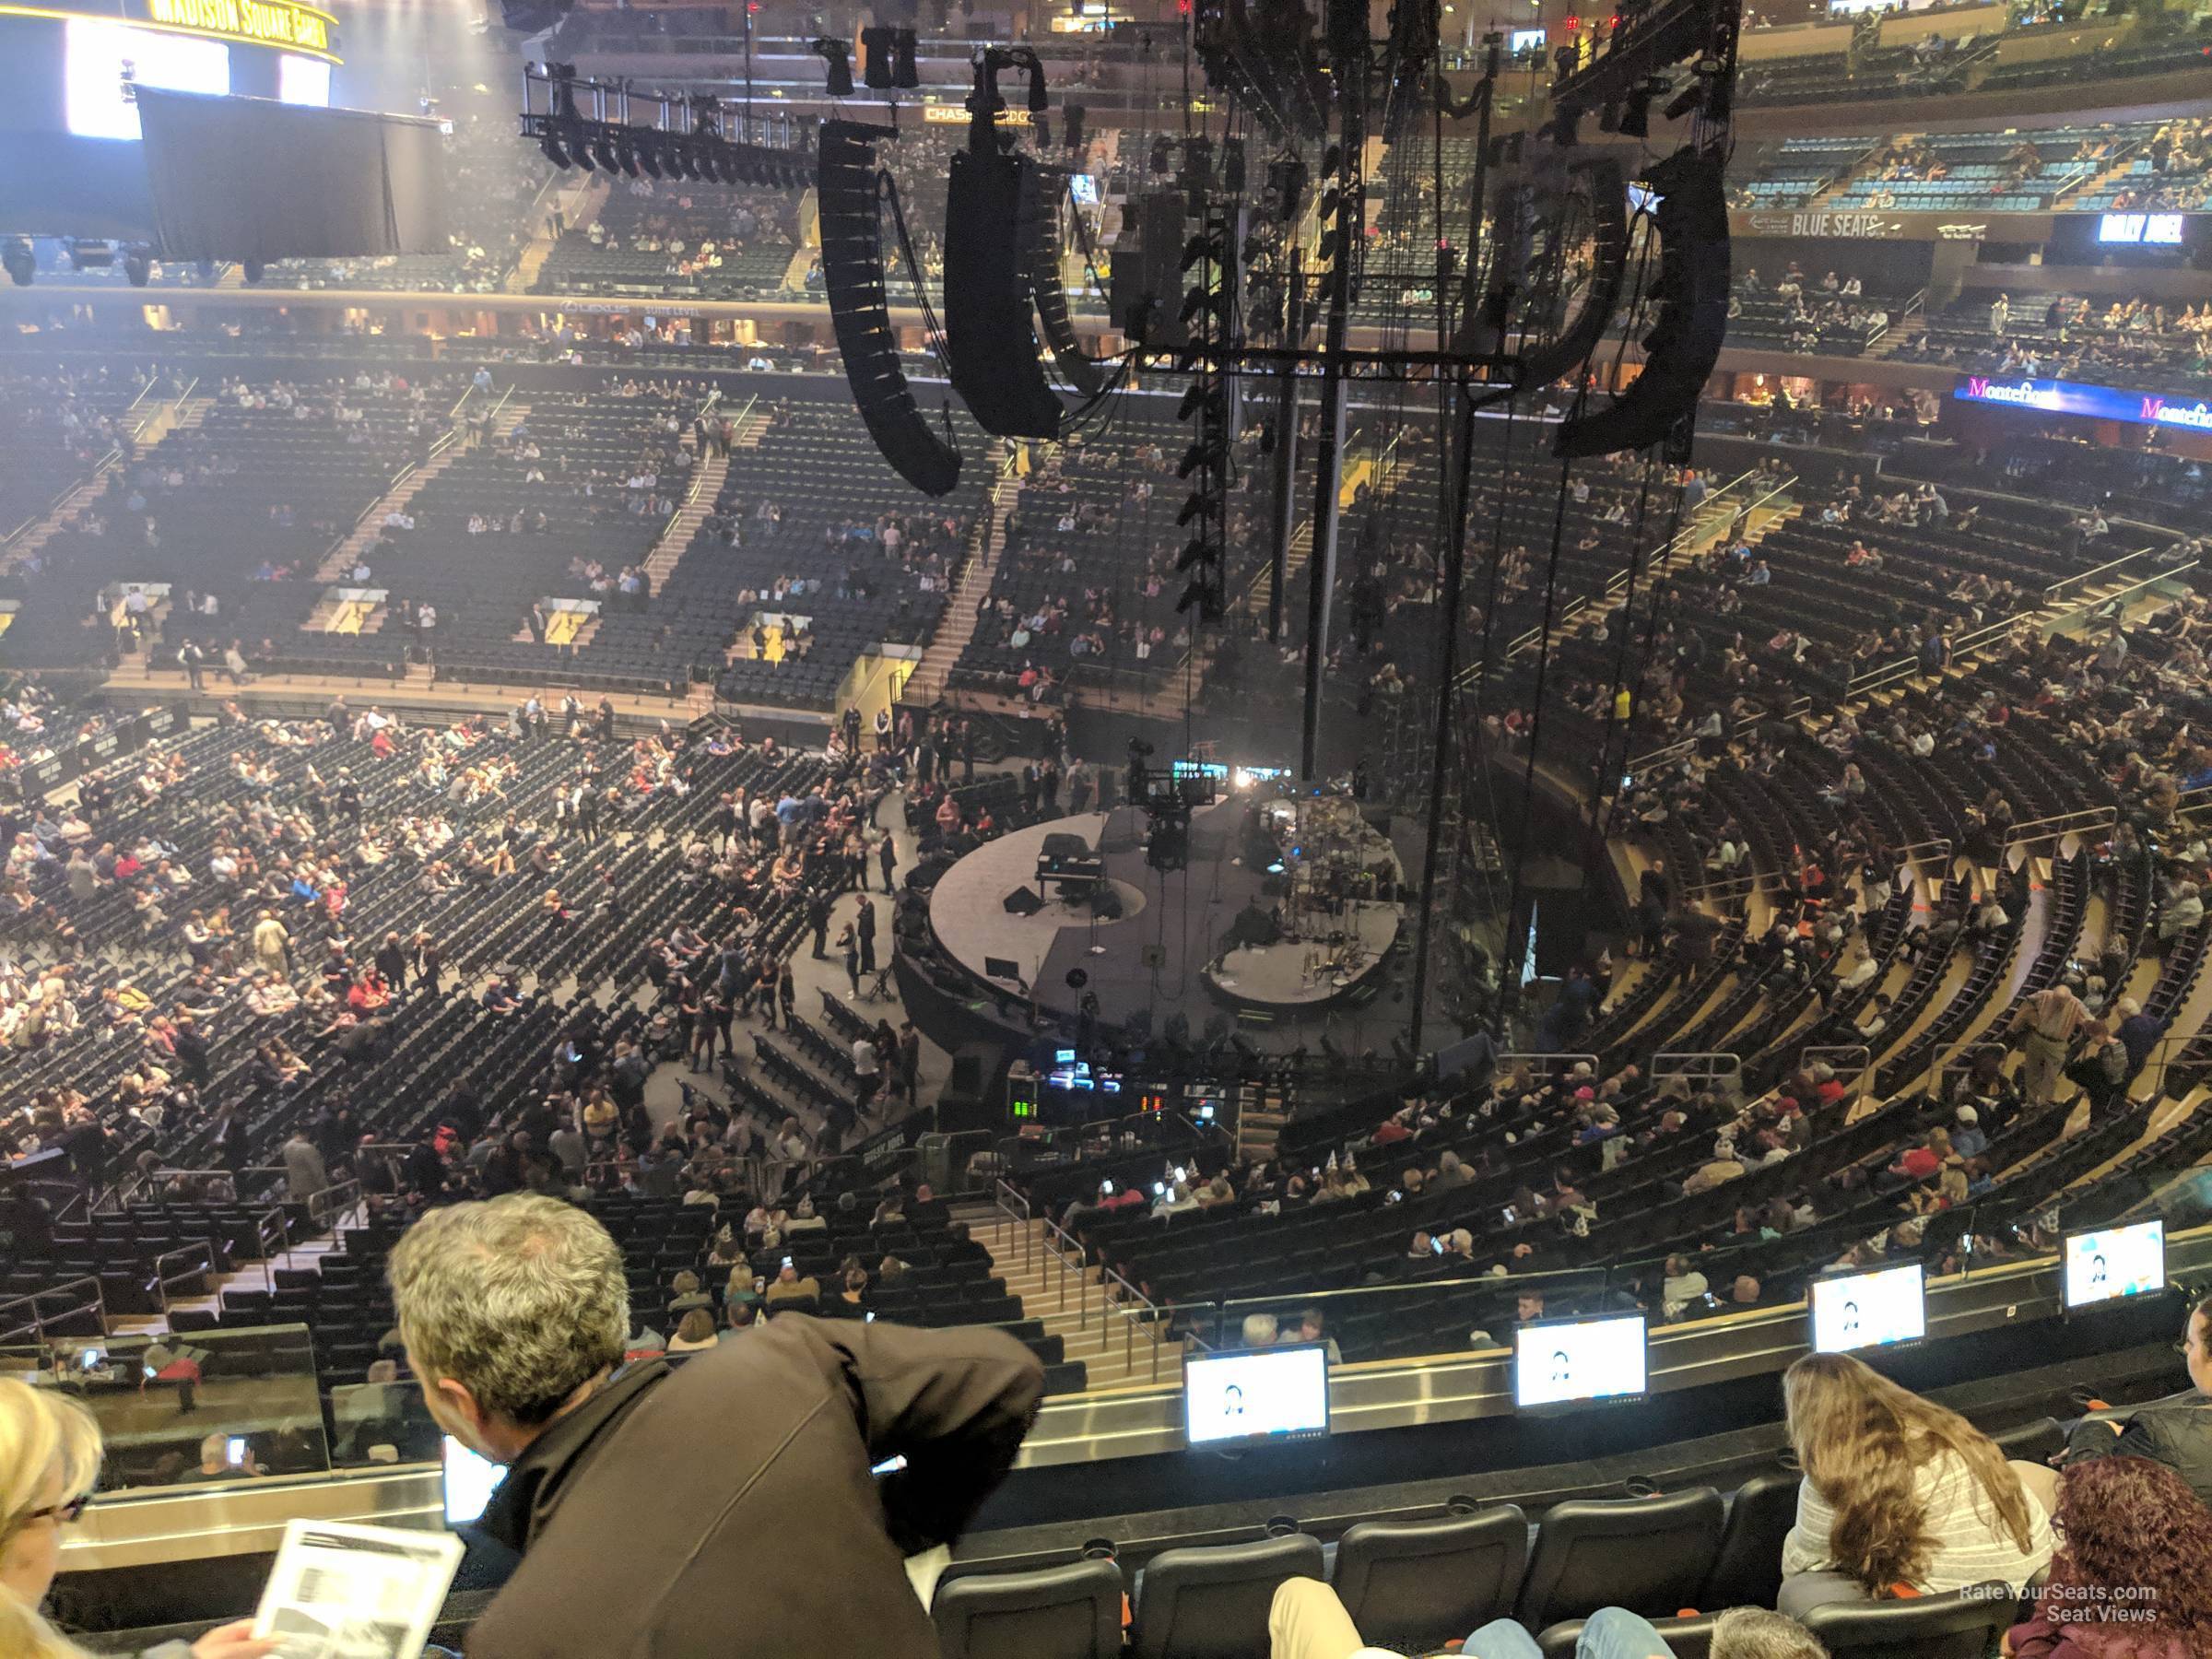 Section 214 at Madison Square Garden